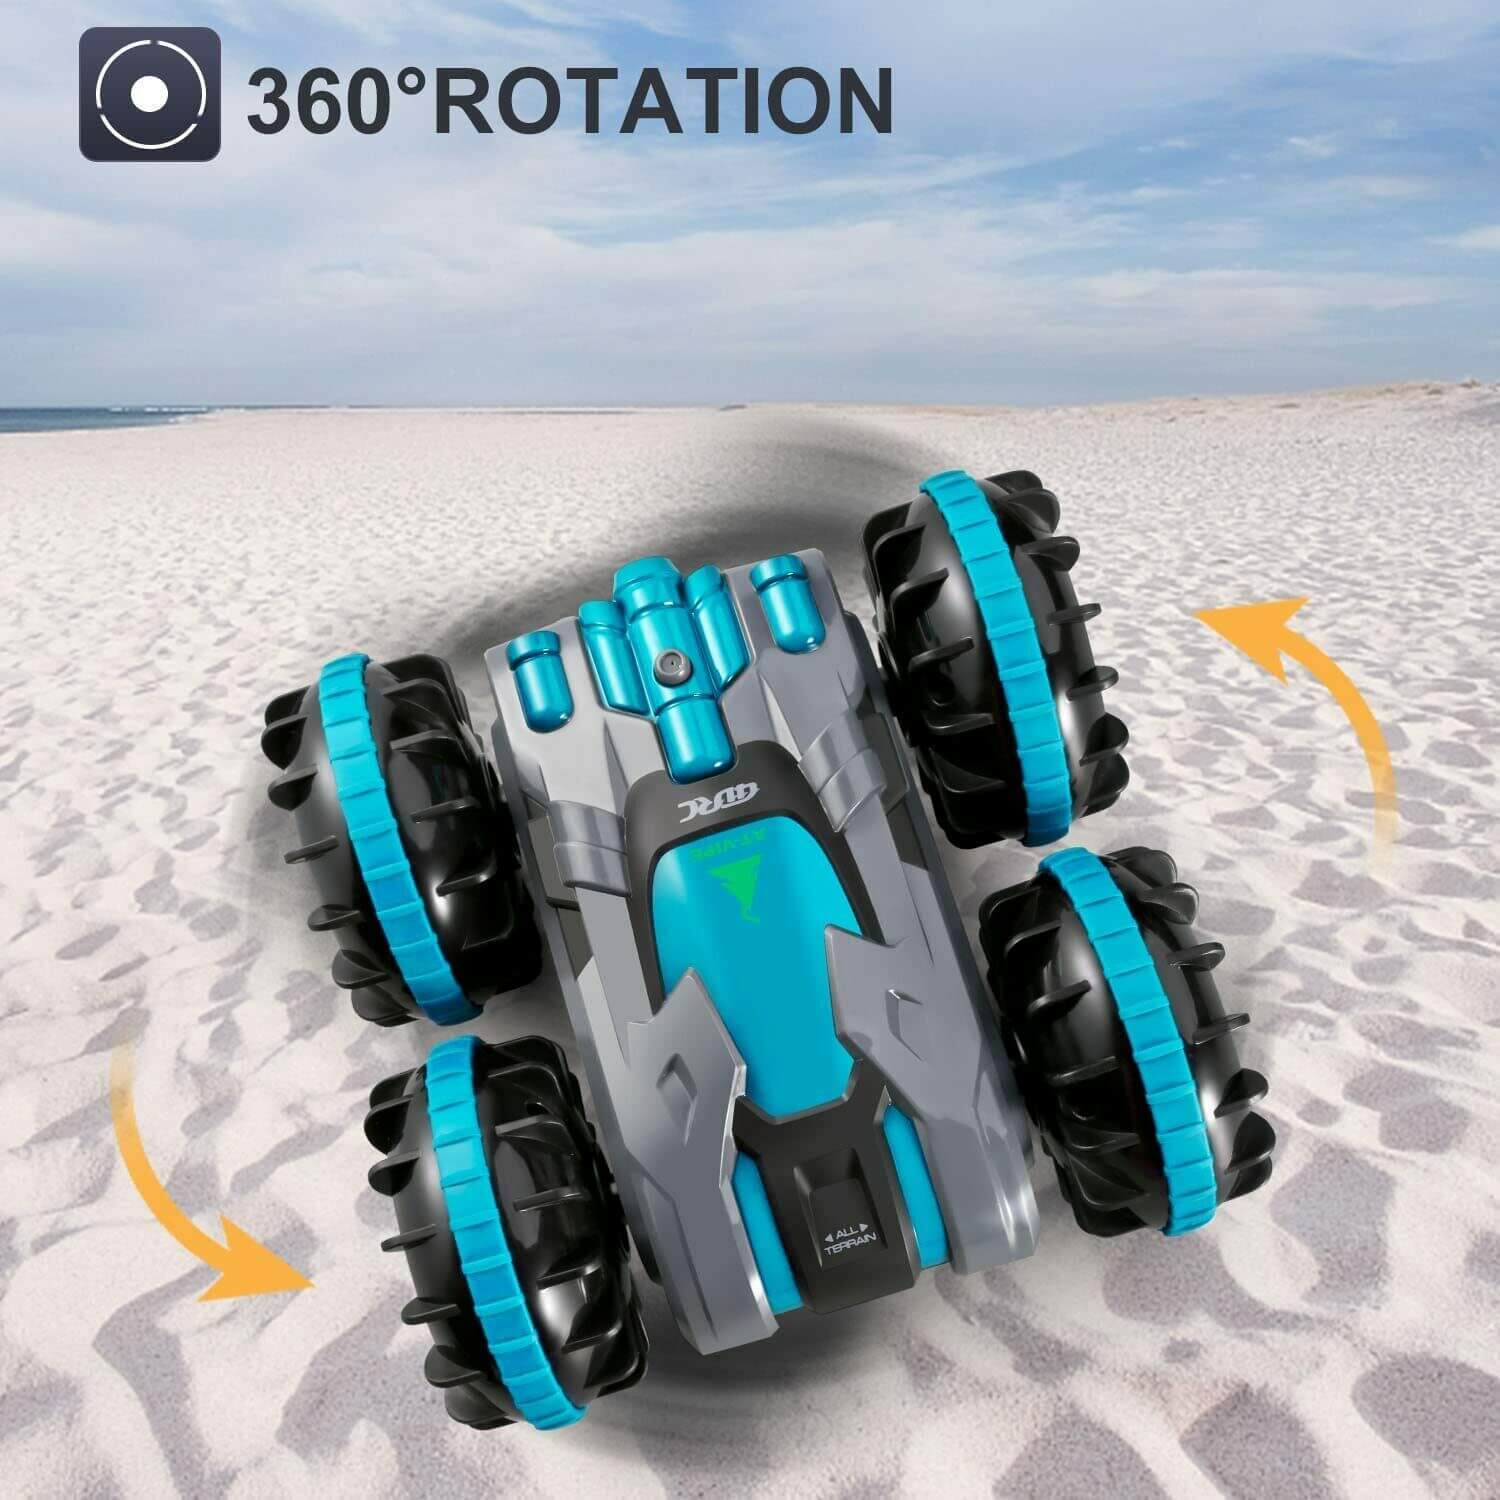 4D-C9 RC Car 2.4 GHz Amphibious Car Boat Toys for 5-12 Year Old